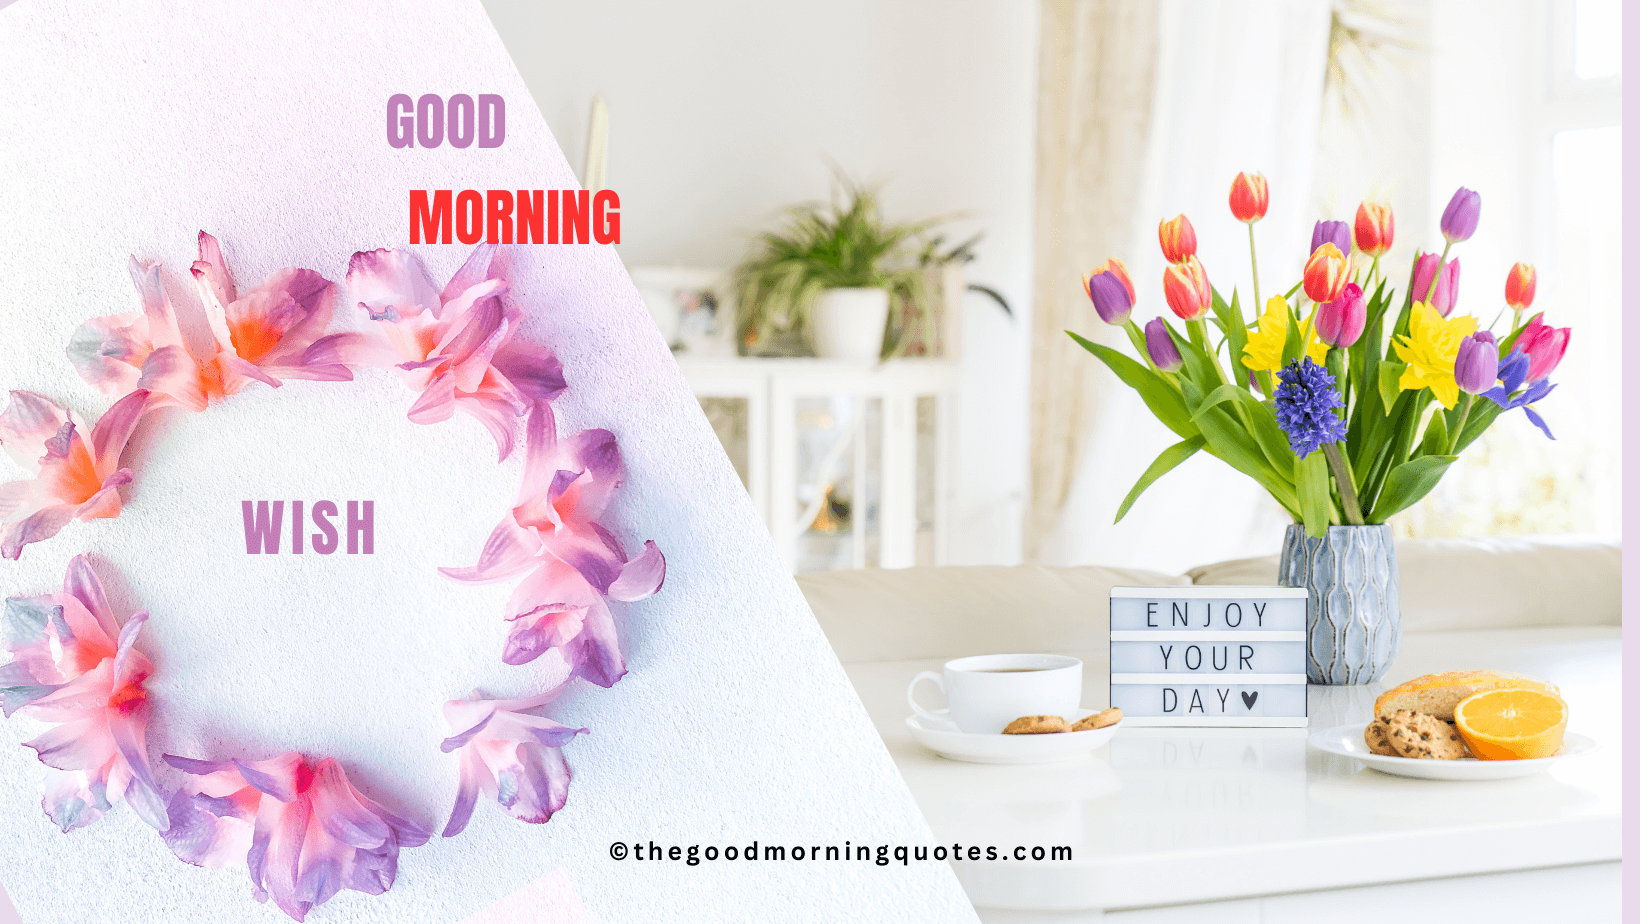 Good Morning Wishes with Quotes in Hindi